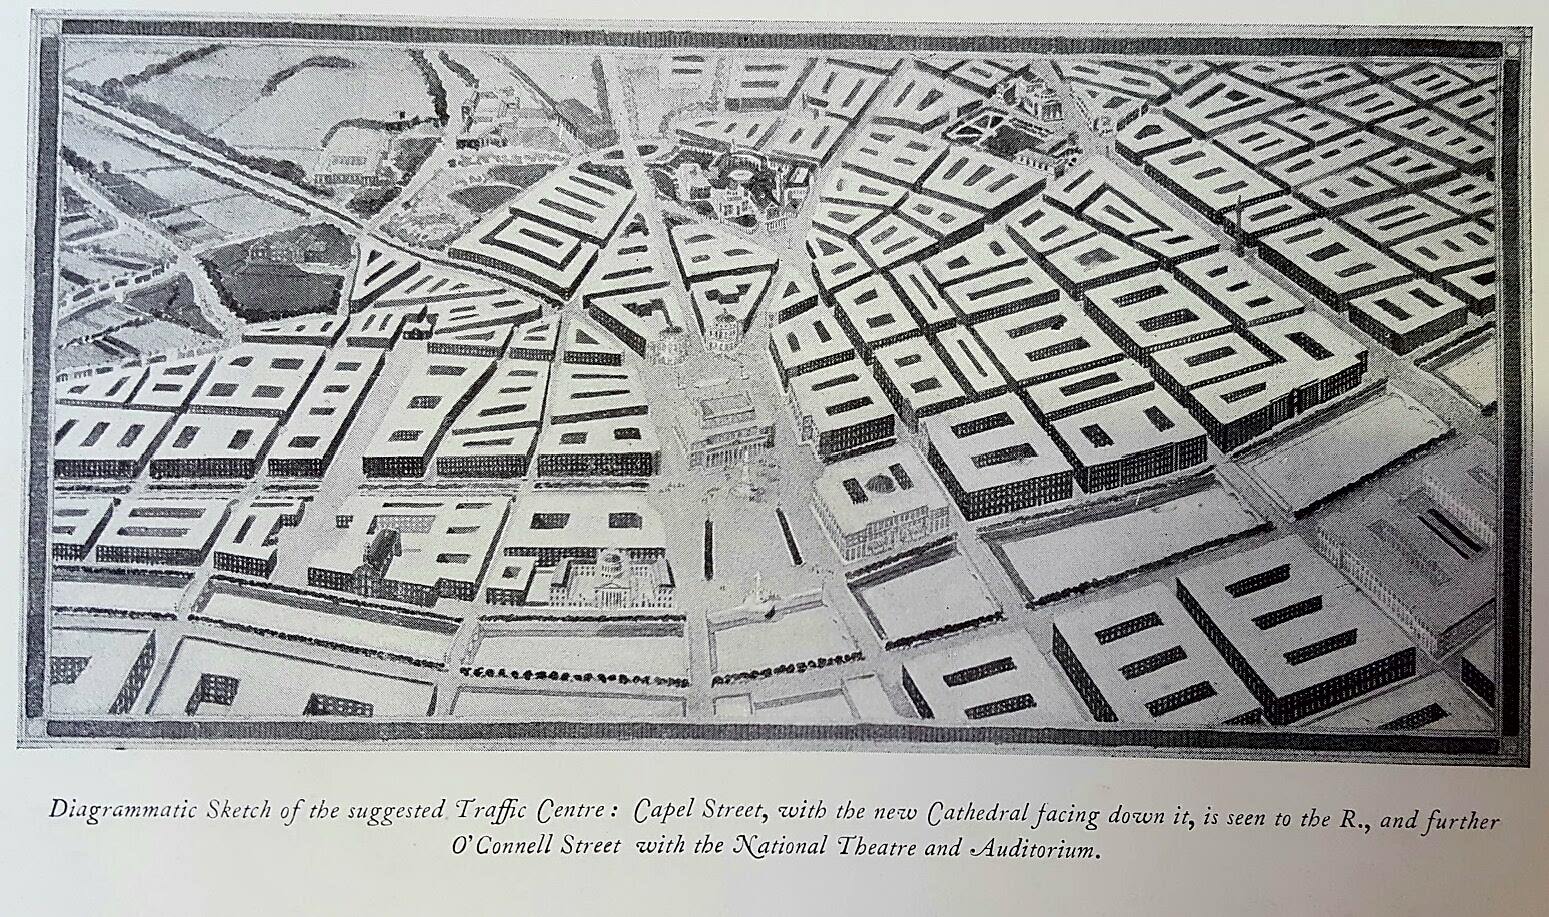 Plan of Dublin from Abercrombie's 1922 'Dublin of the future'